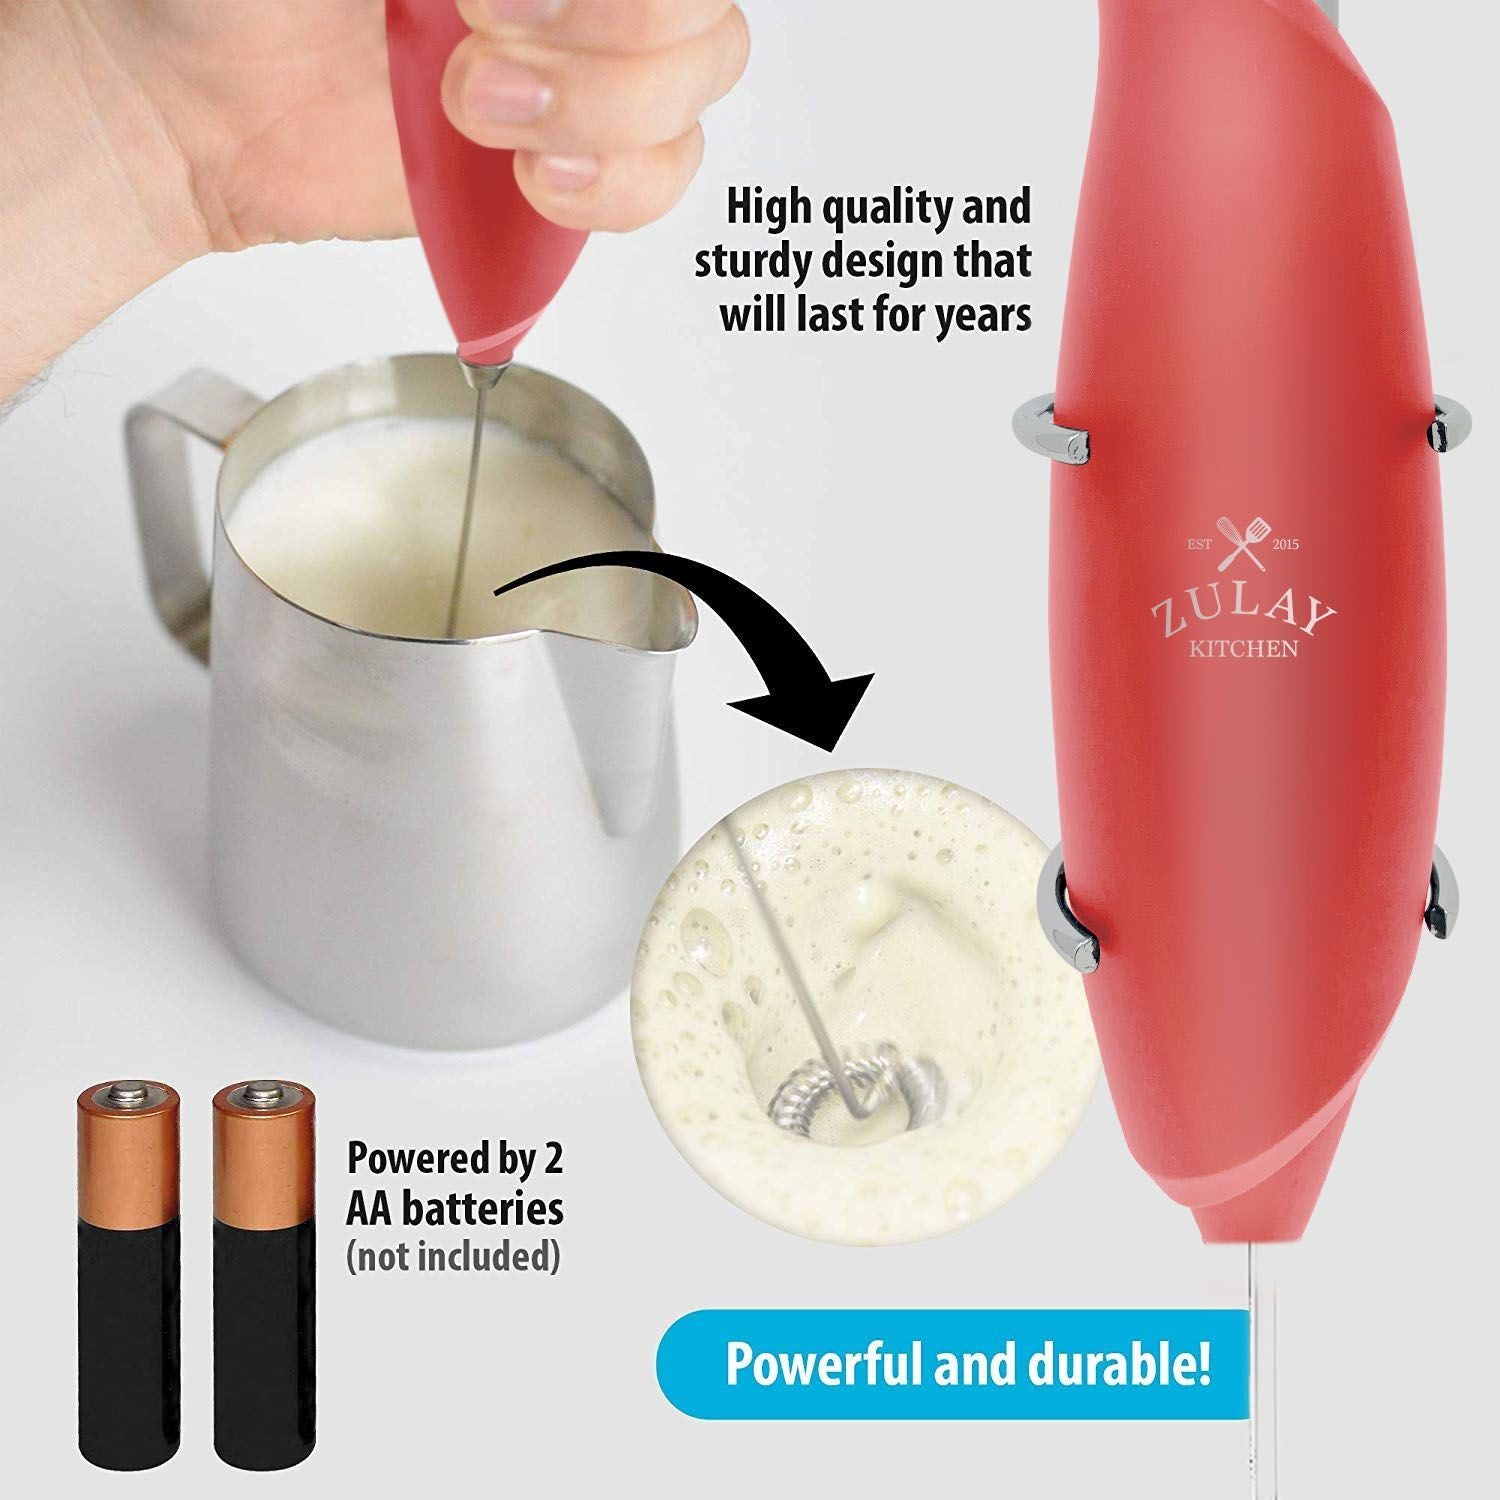 Zulay Kitchen Milk Boss Milk Frother With Holster Stand - Red, 1